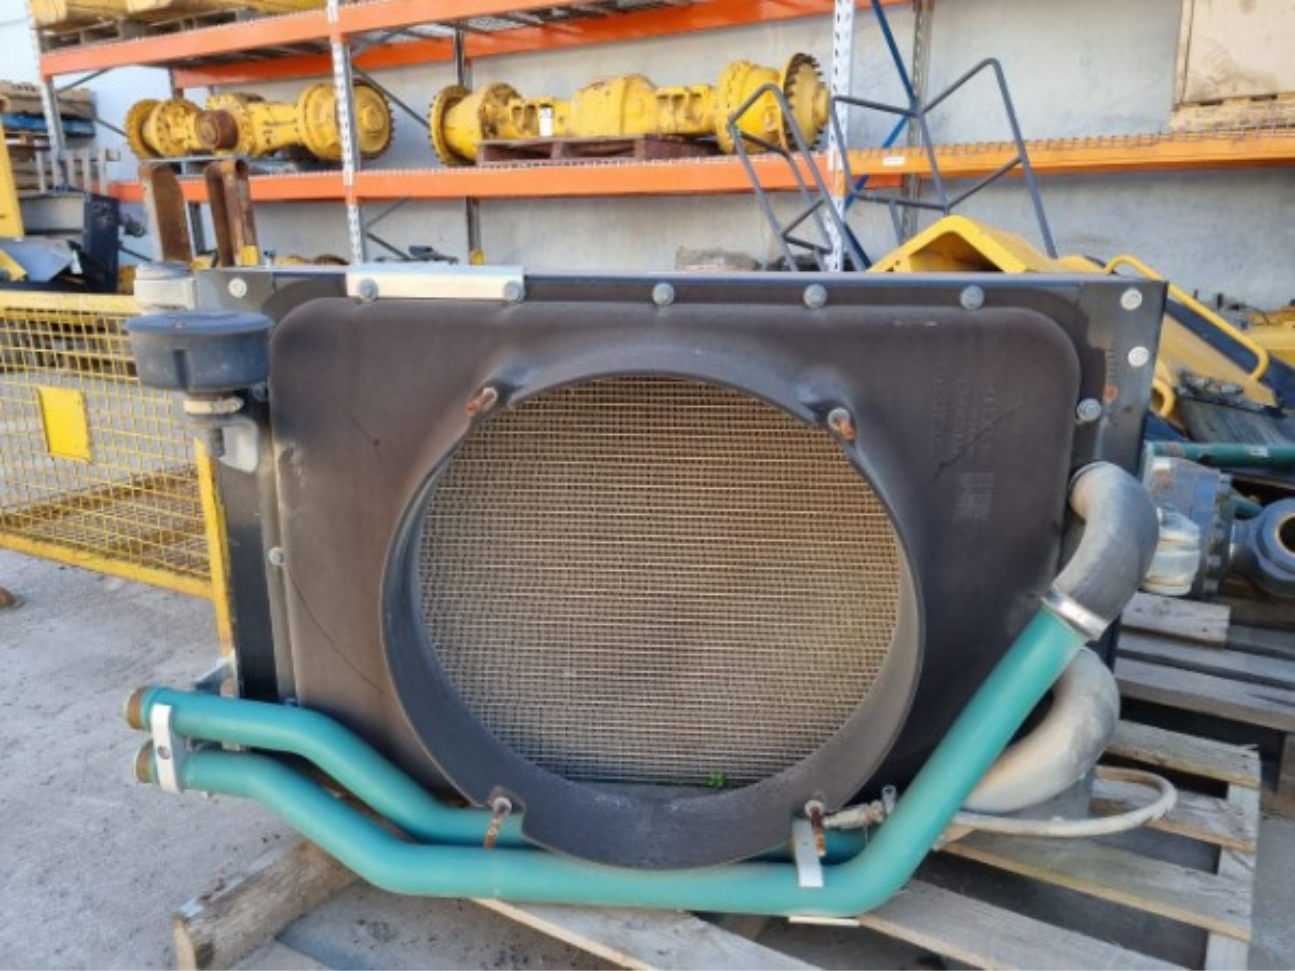 Image of a used Radiator A40E for sale from HT spares in our yard sale.